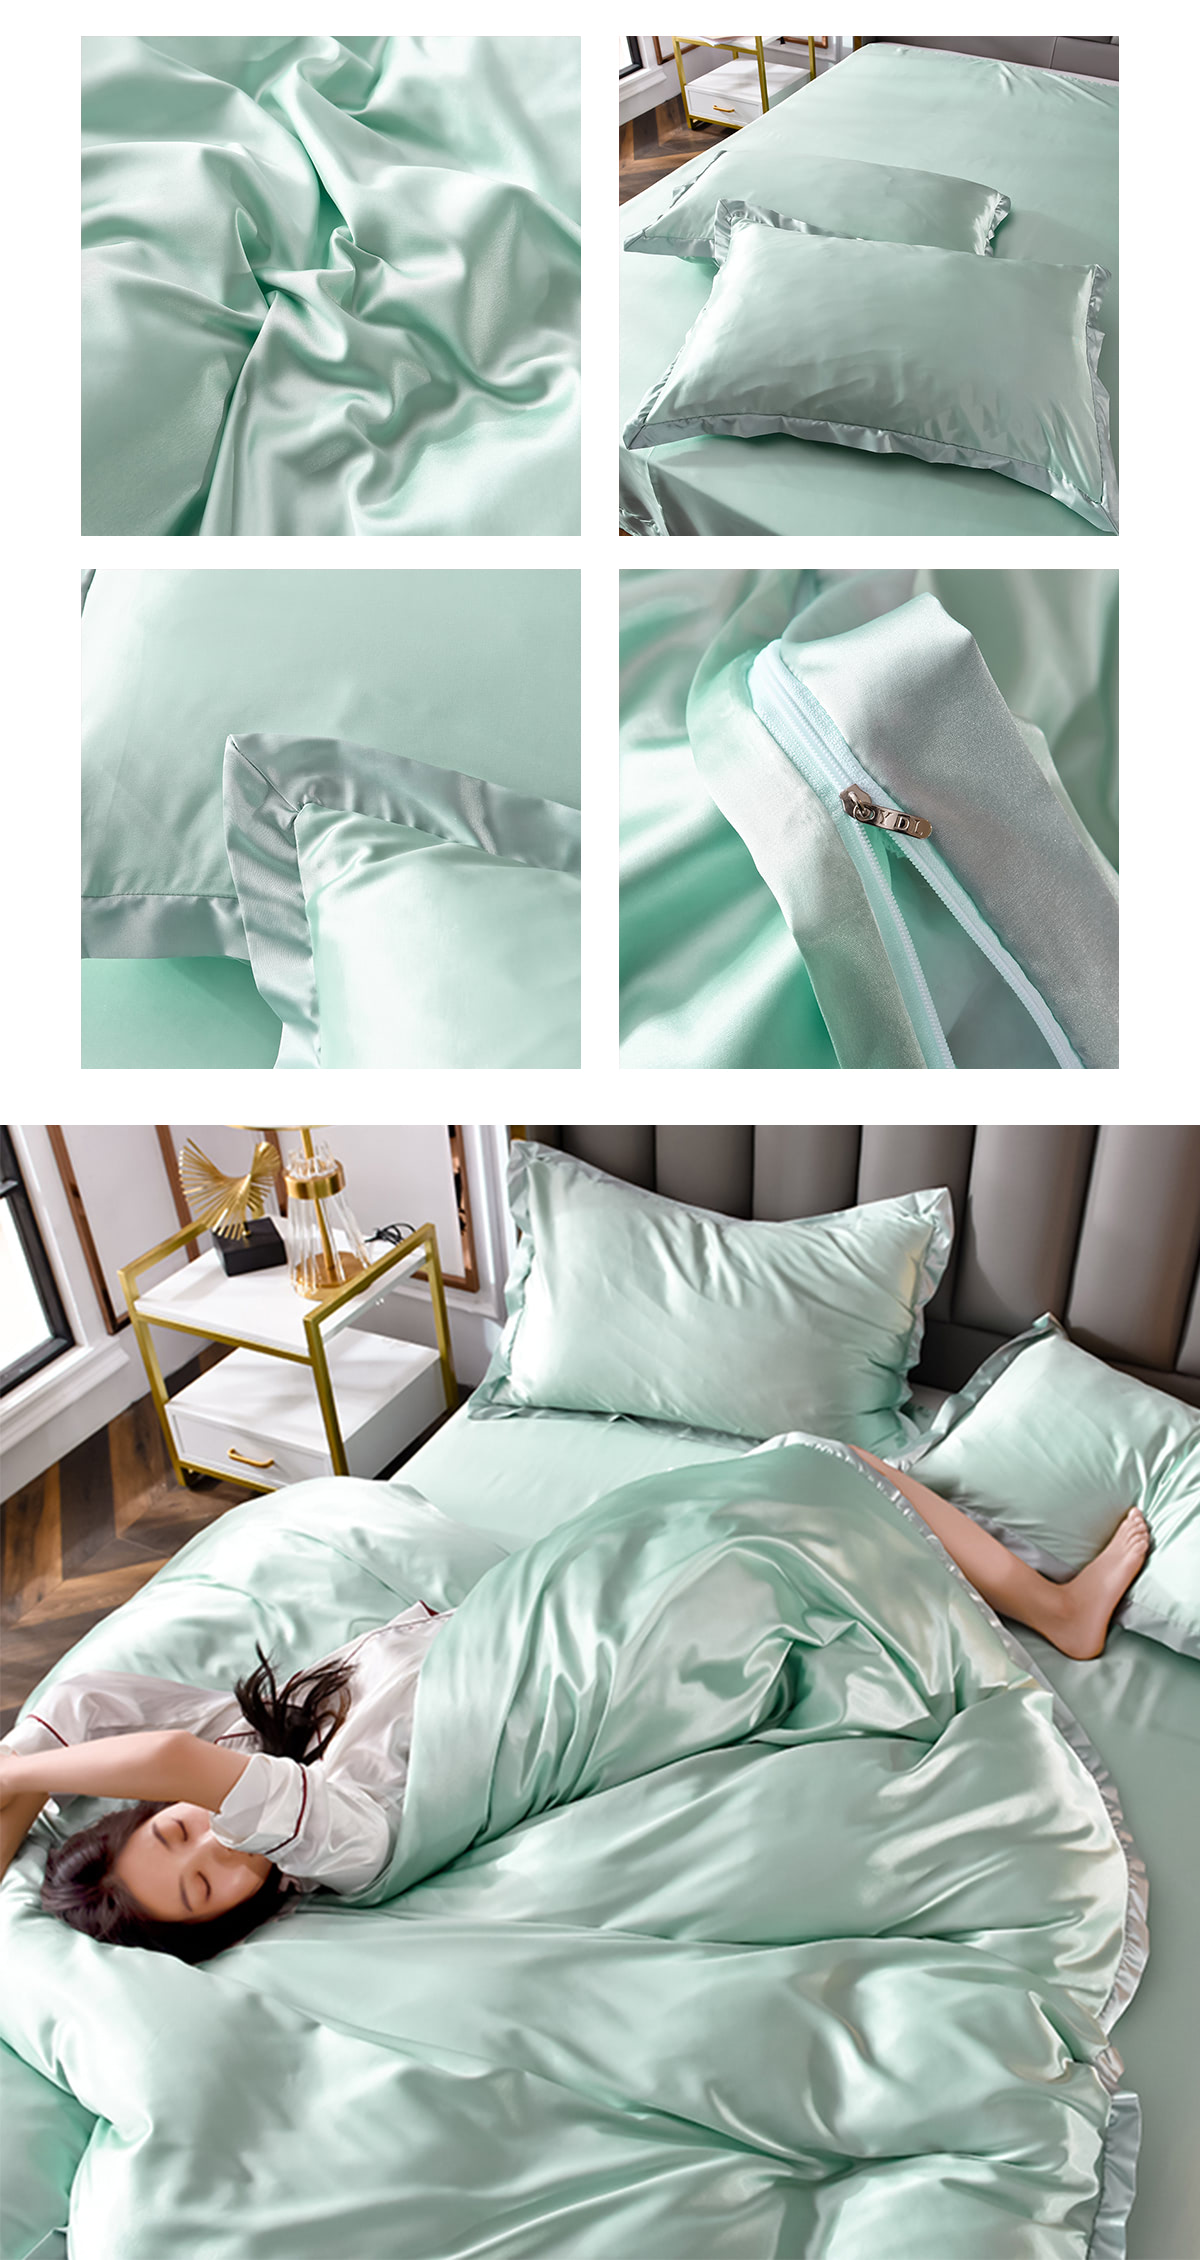 Fresh-and-Soft-Comfortable-Satin-Bed-Cover-Sheet-Set26.jpg